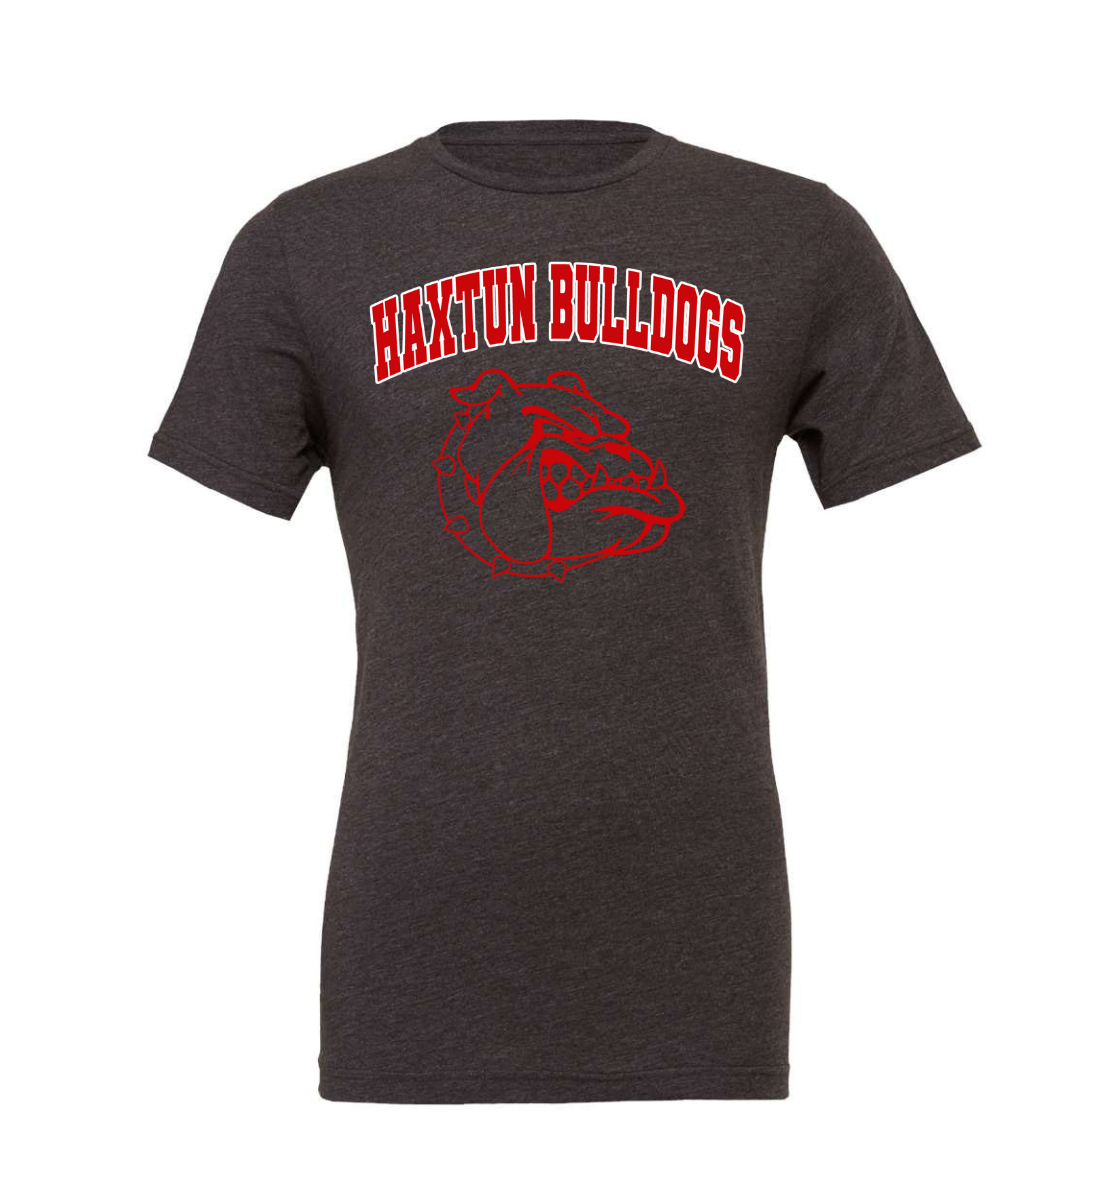 haxtun bulldogs youth t-shirt: for young bulldogs fans only!